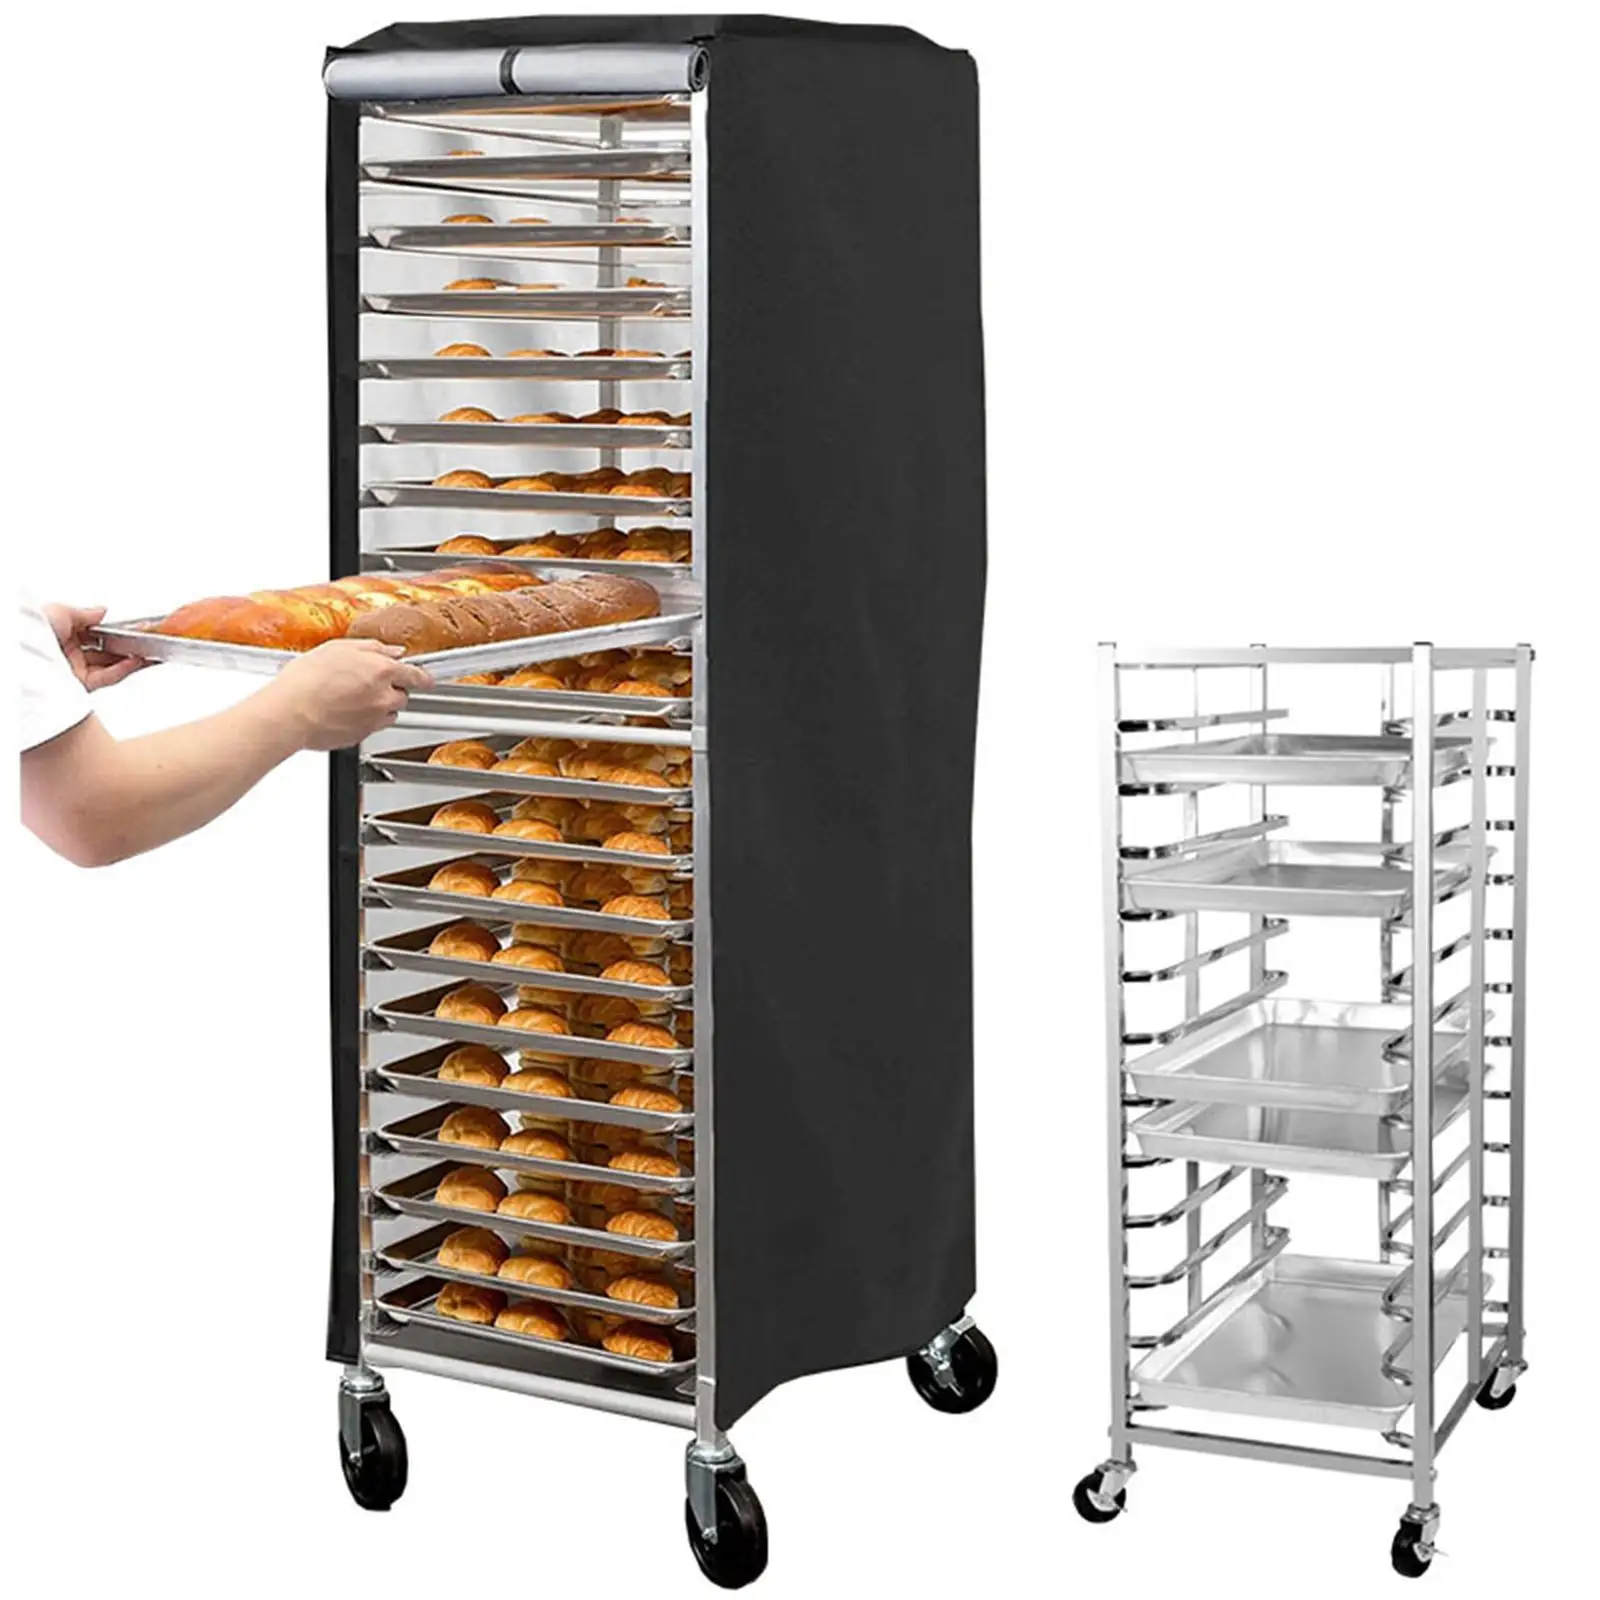 Bread Rack Cover 23``x28``x64`` High Density Protective Covers Bun Pan Rack Cover for Dining Room Bakery Kitchen Restaurant